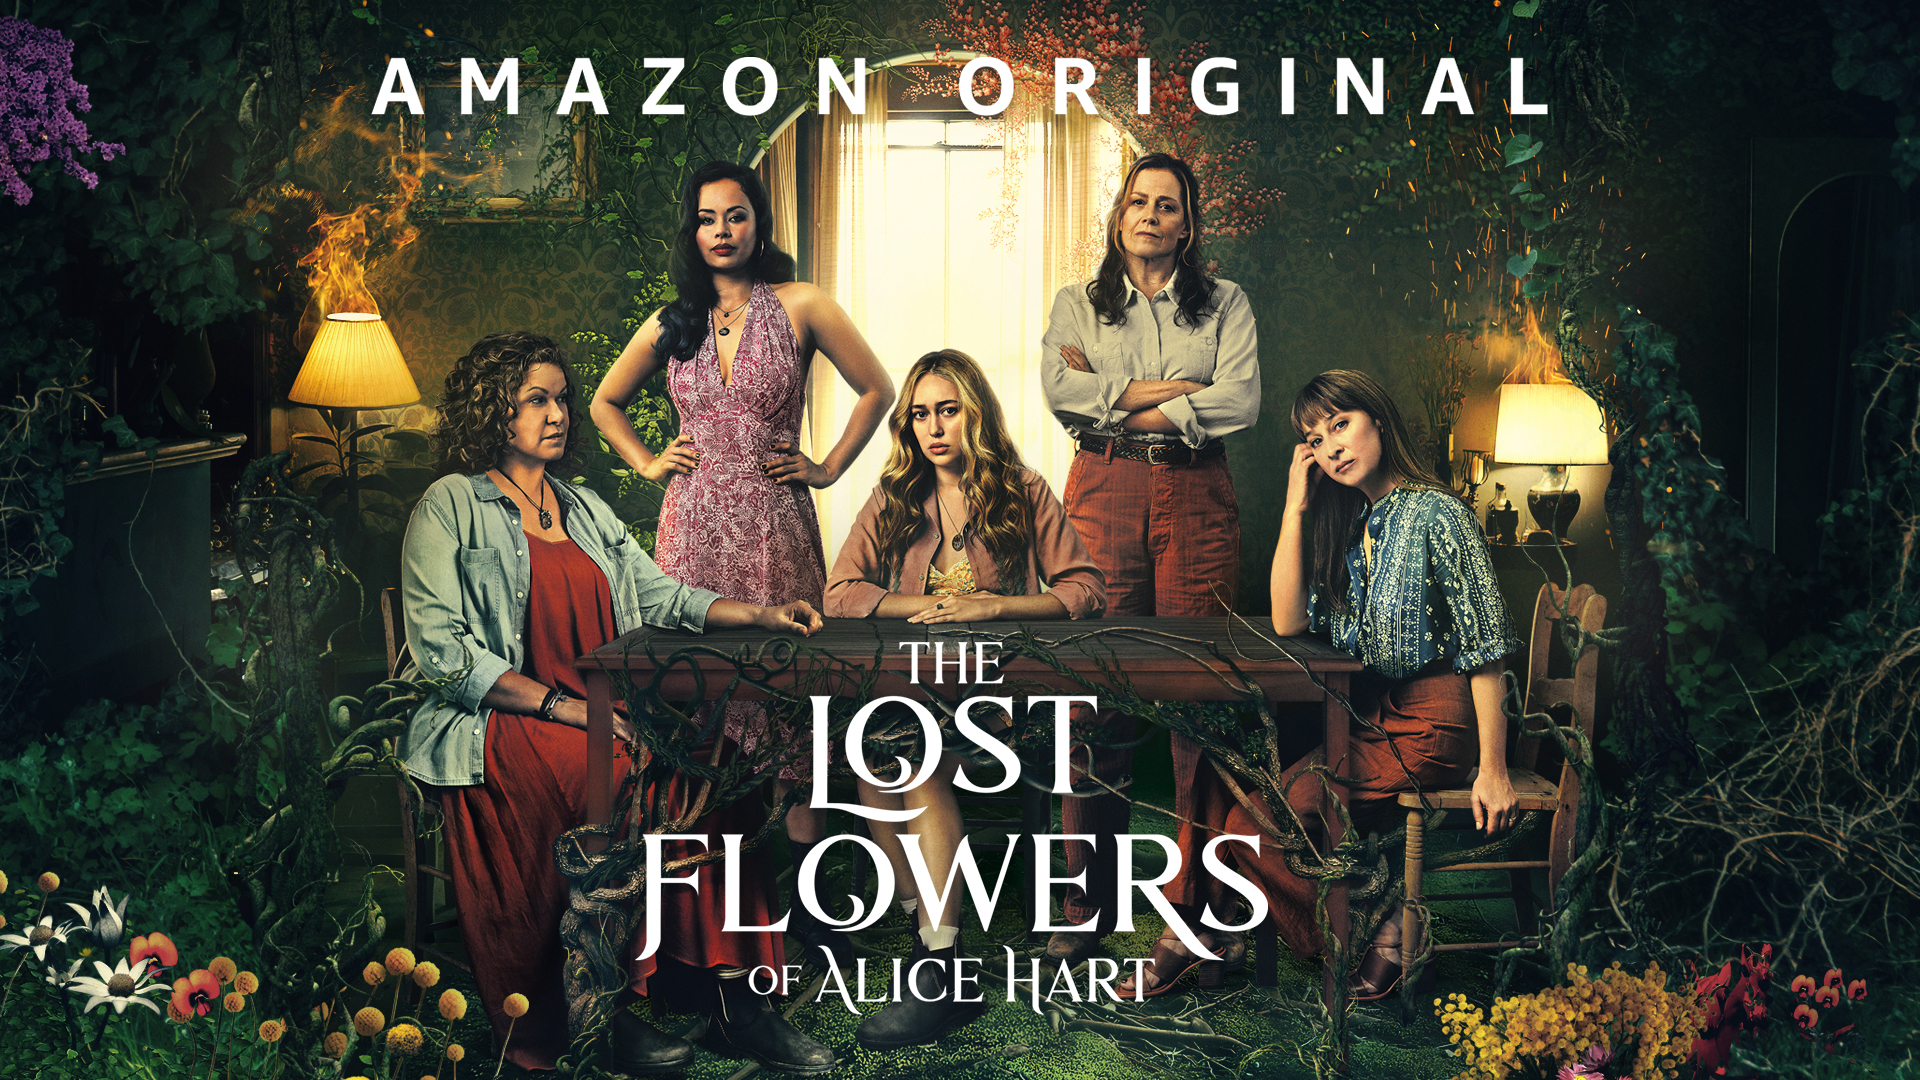 The Lost Flowers of Alice Hart image